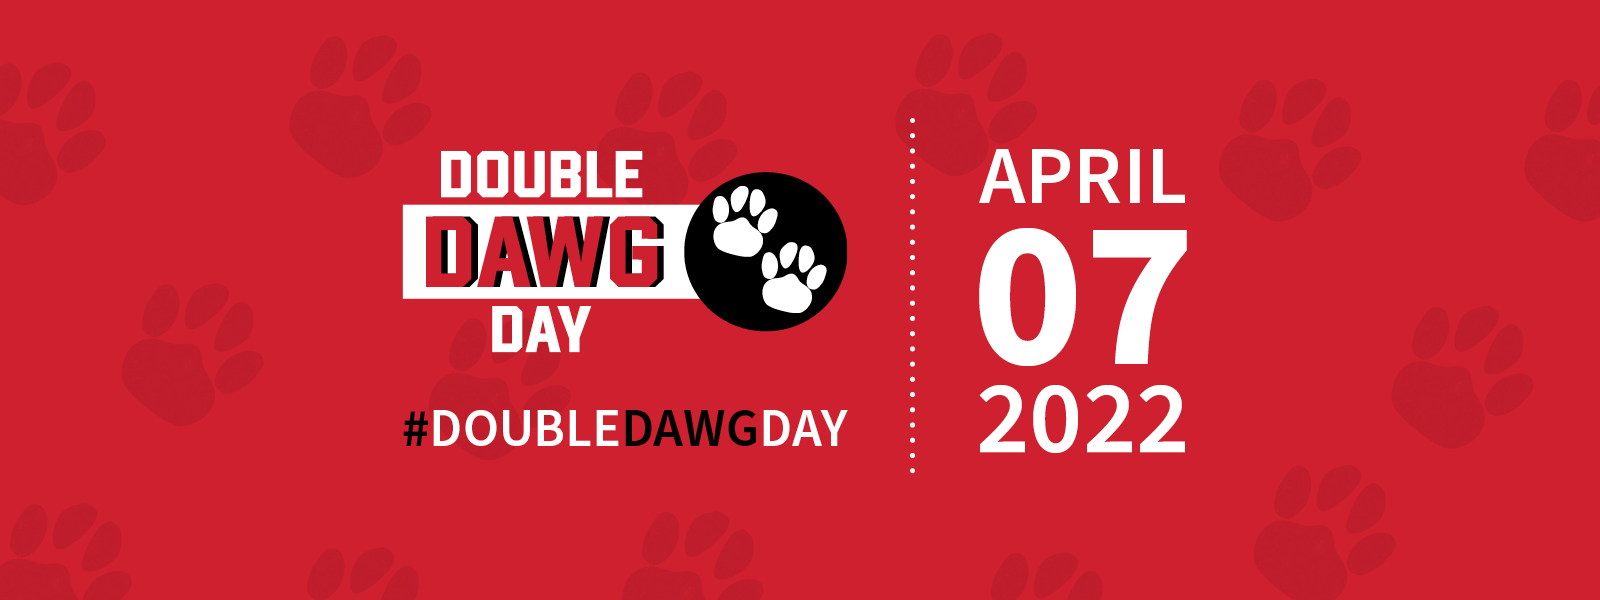 double dawg day banner